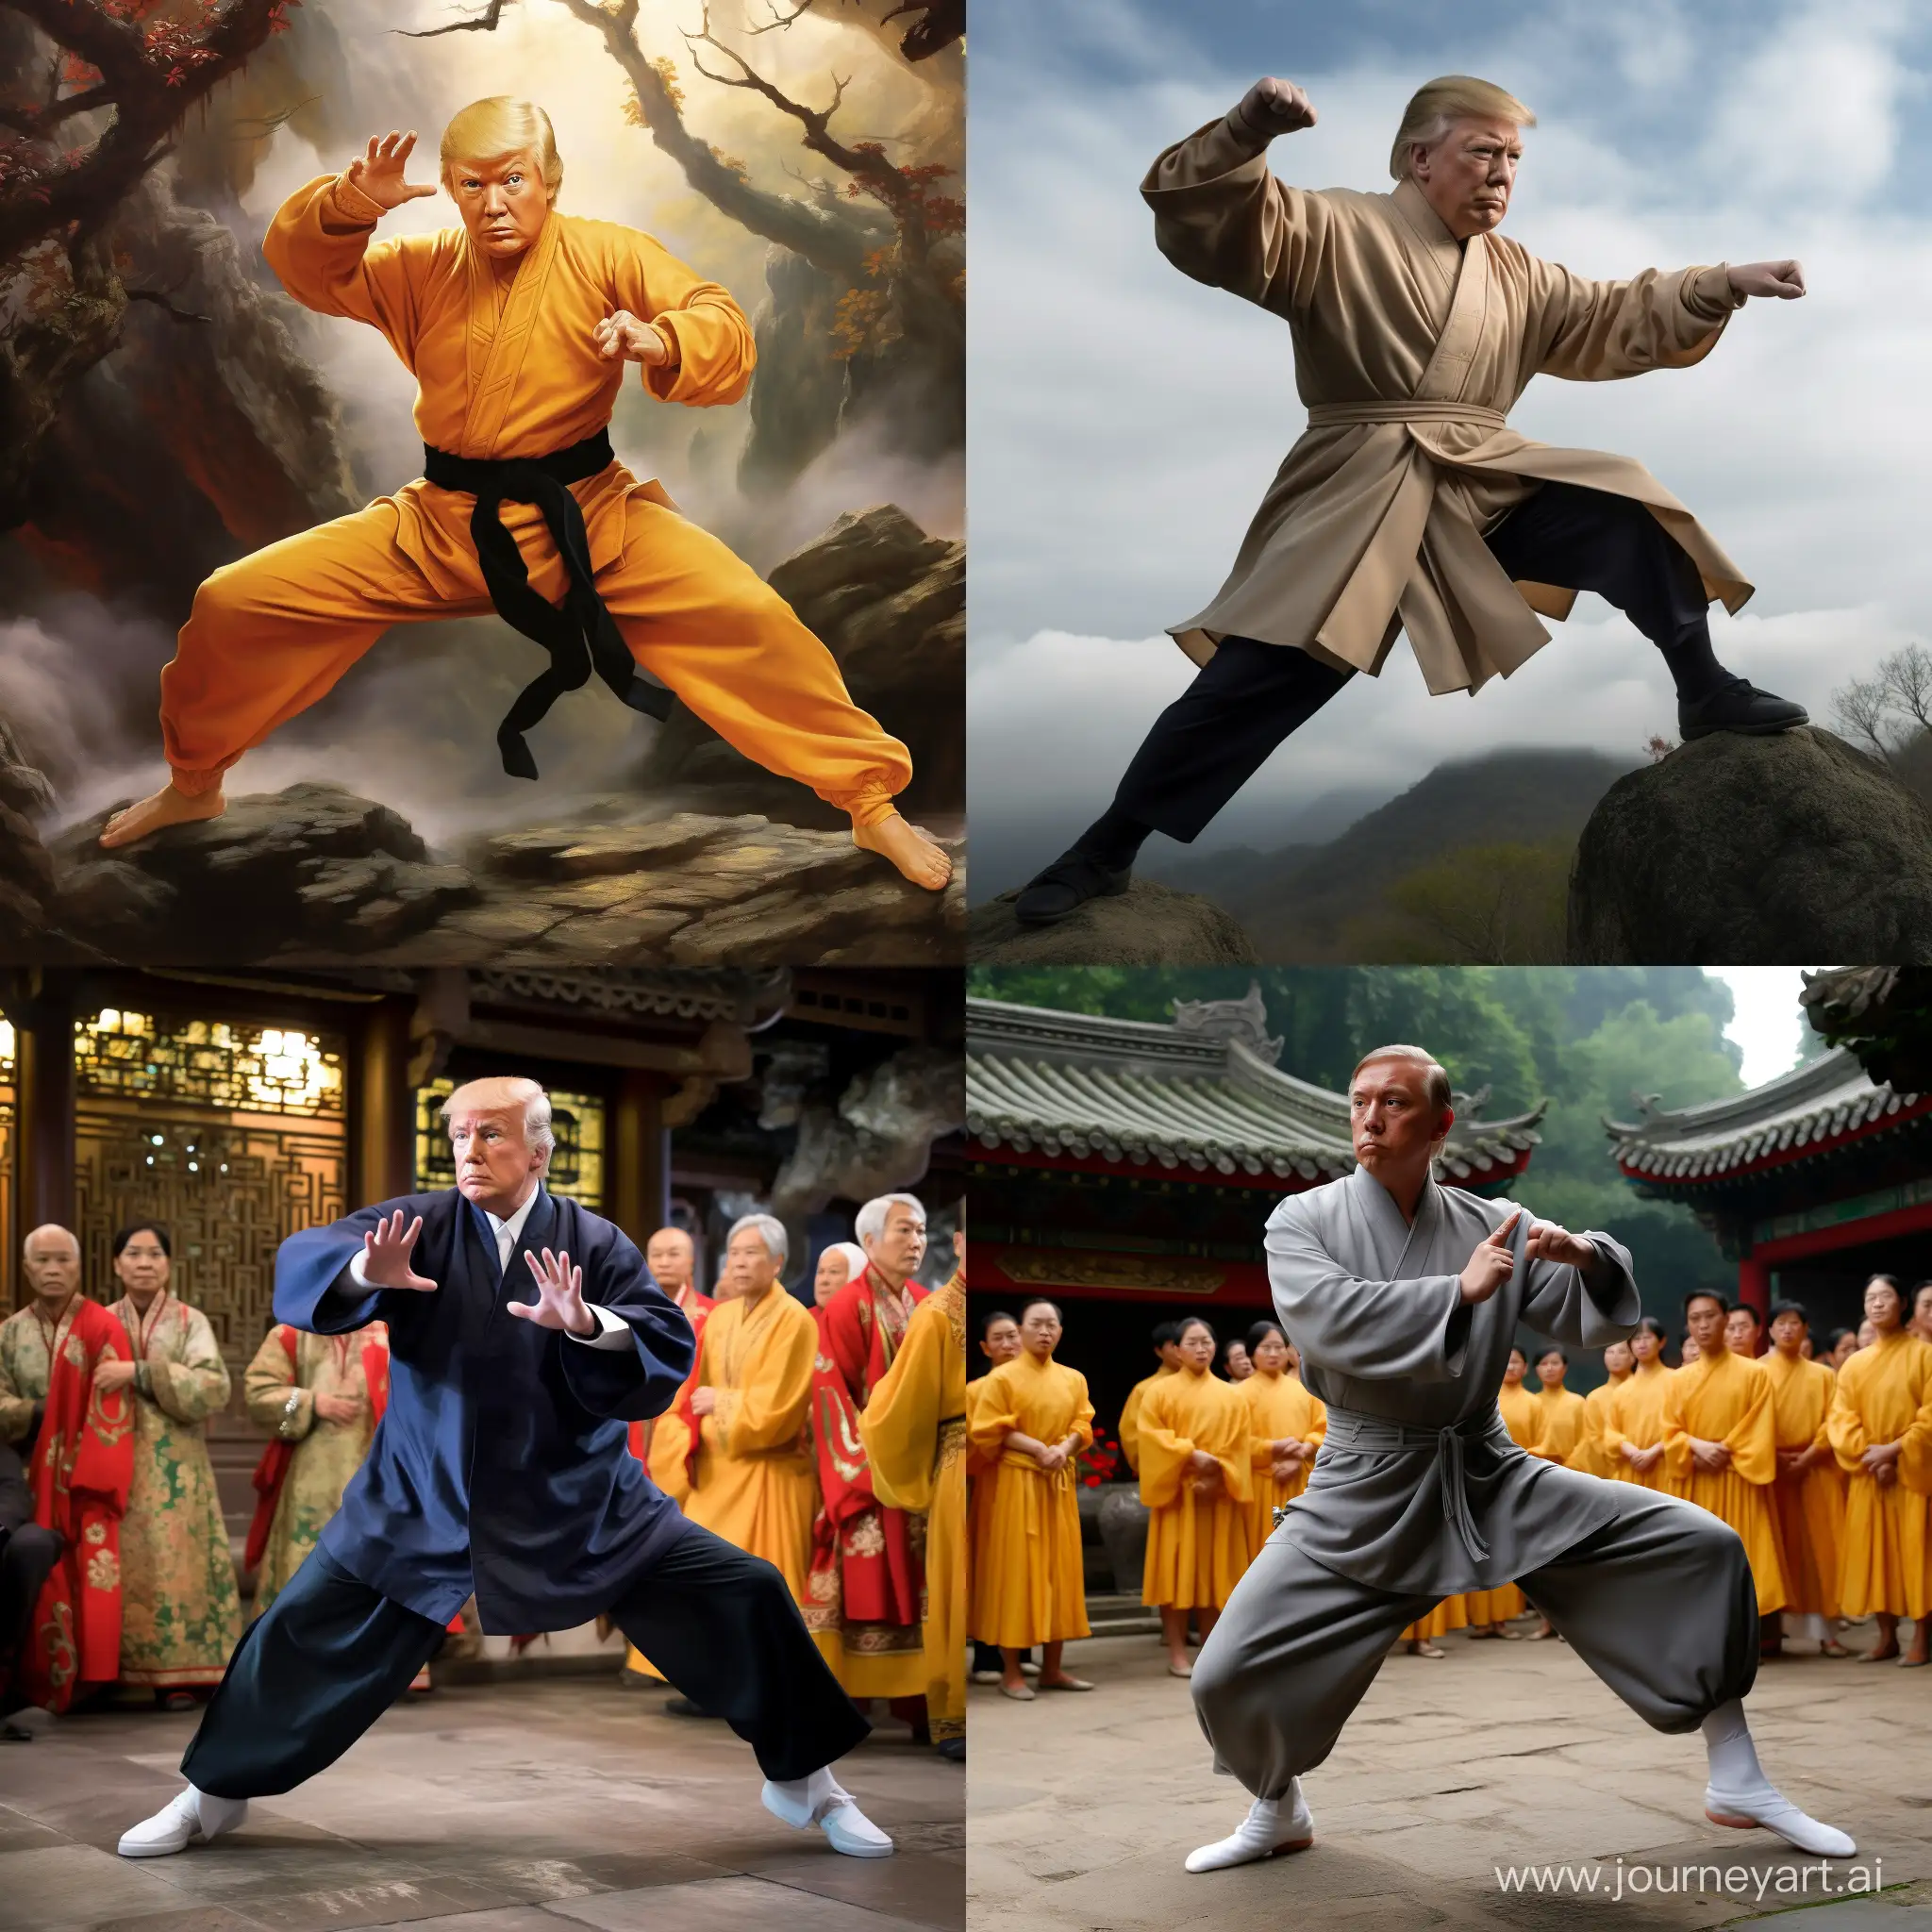 Former-President-Donald-Trump-Engages-in-Kung-Fu-Martial-Arts